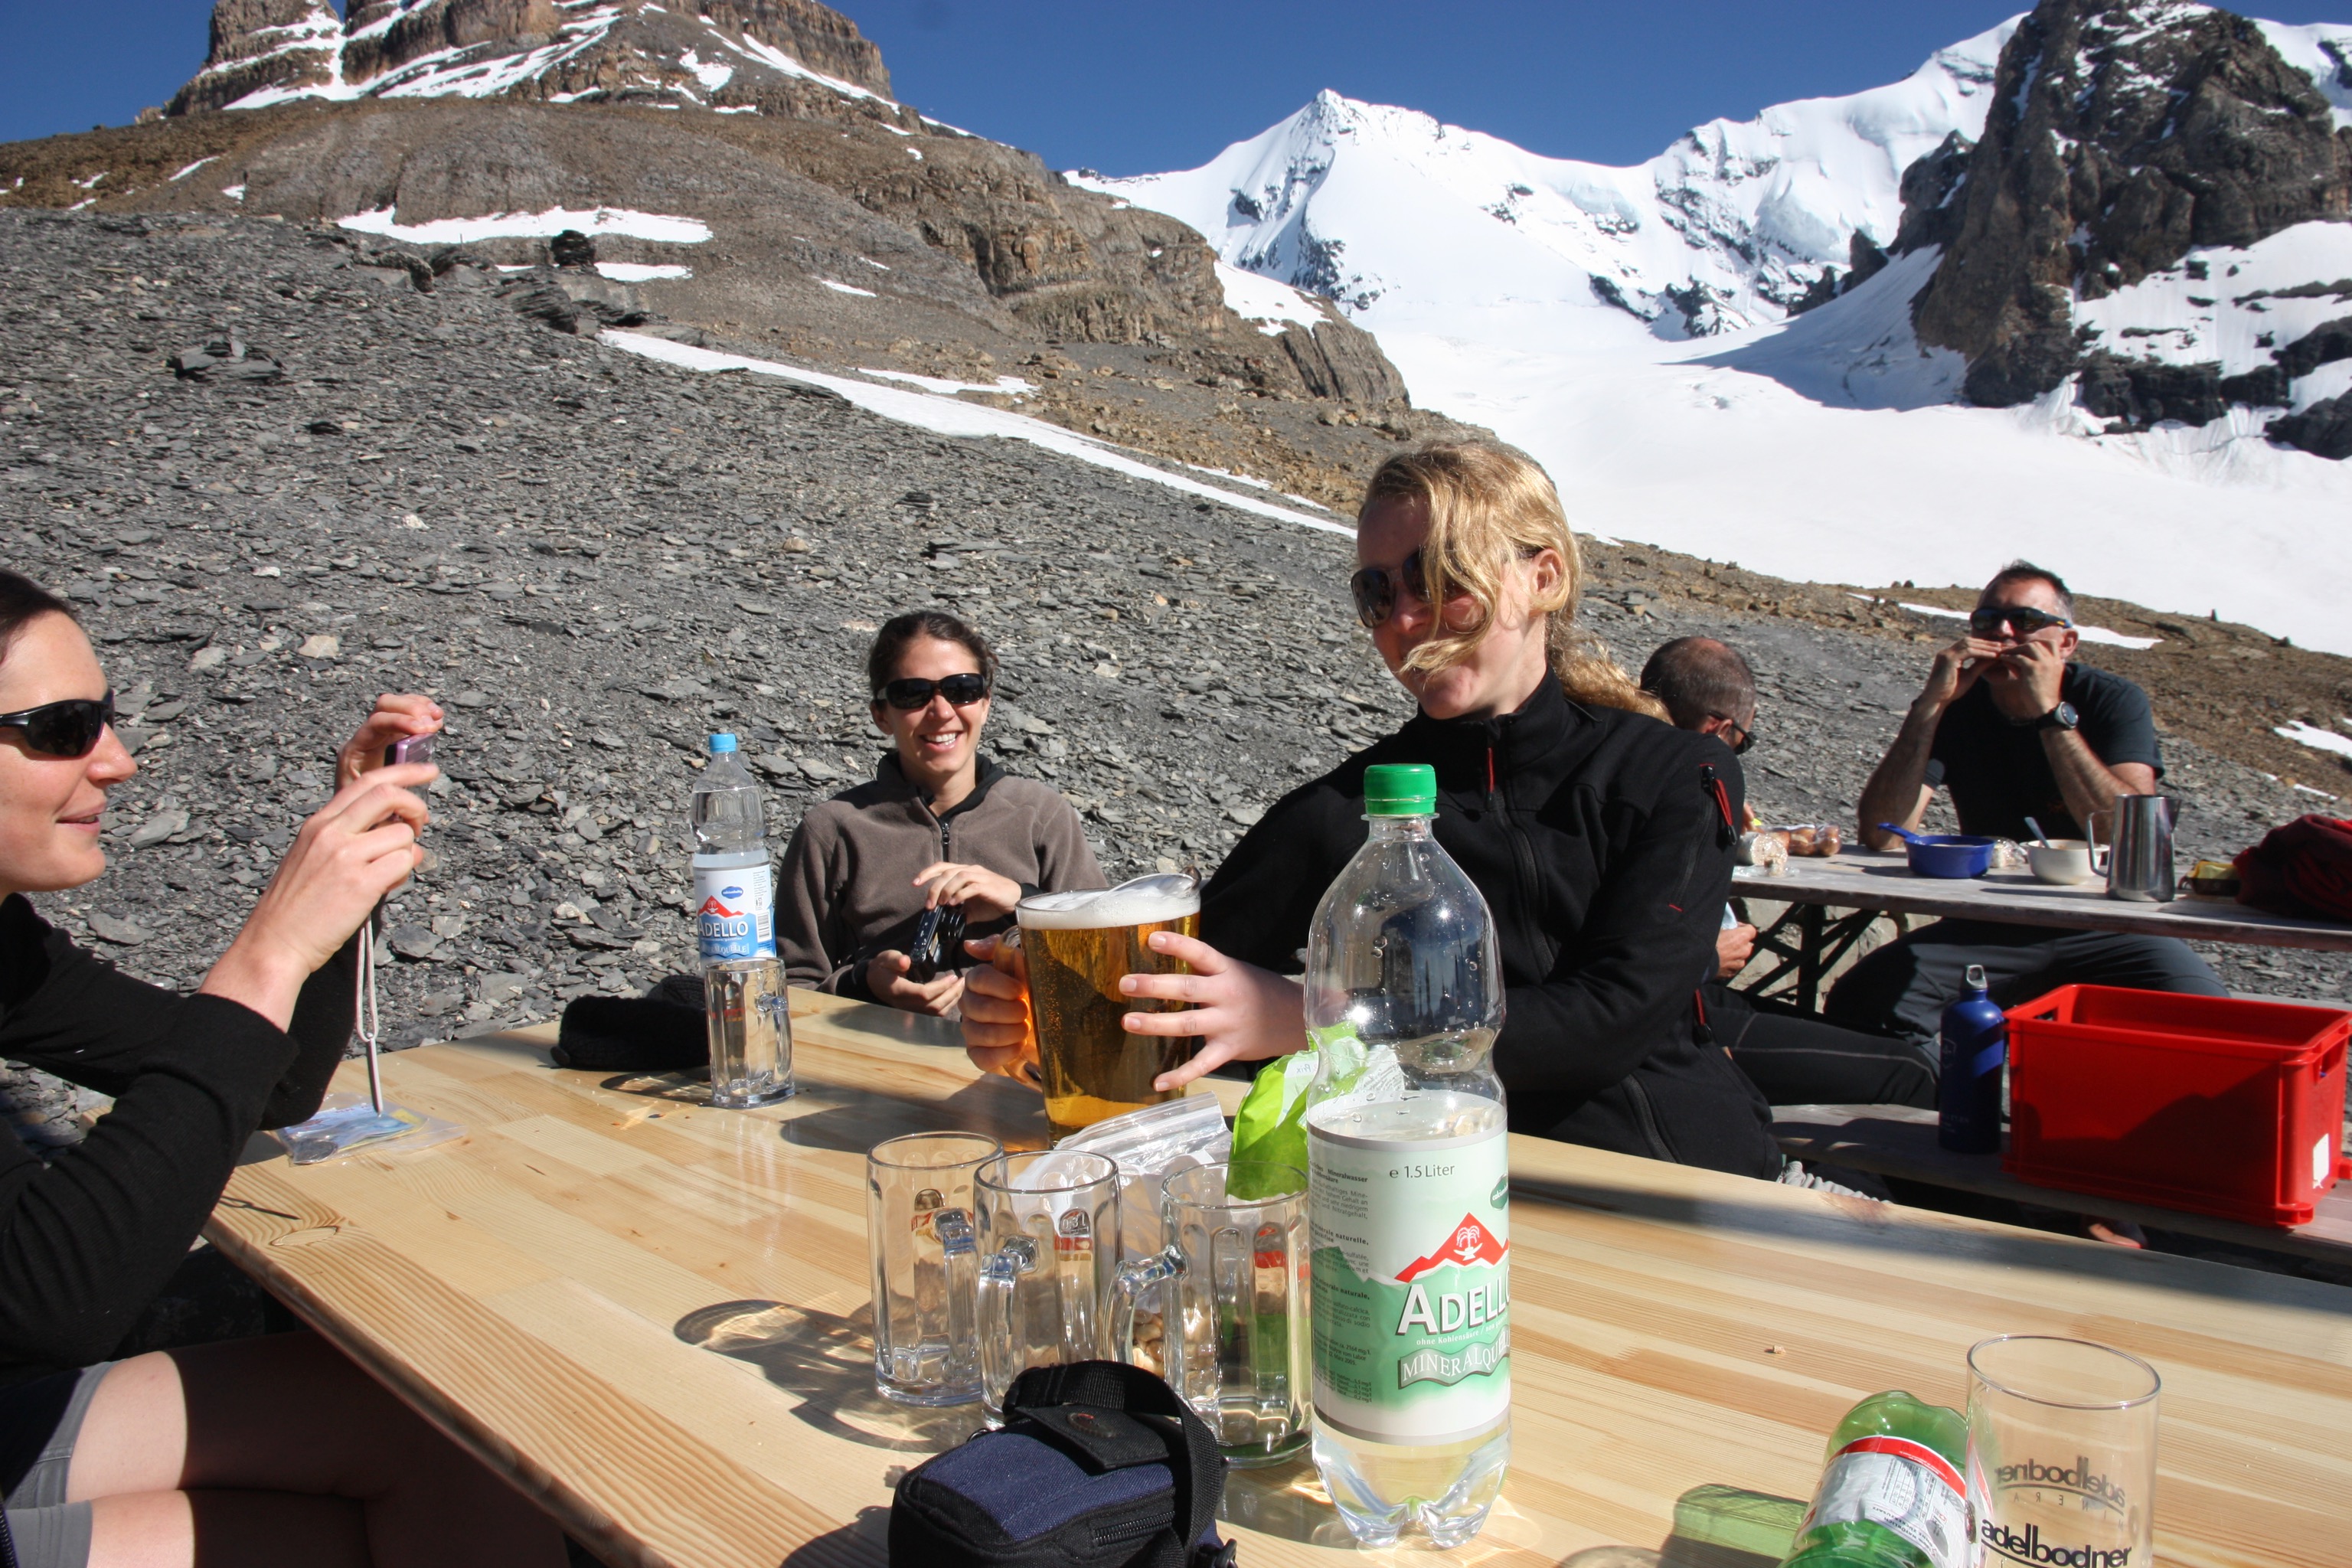 A well earned beer at high altitude :)